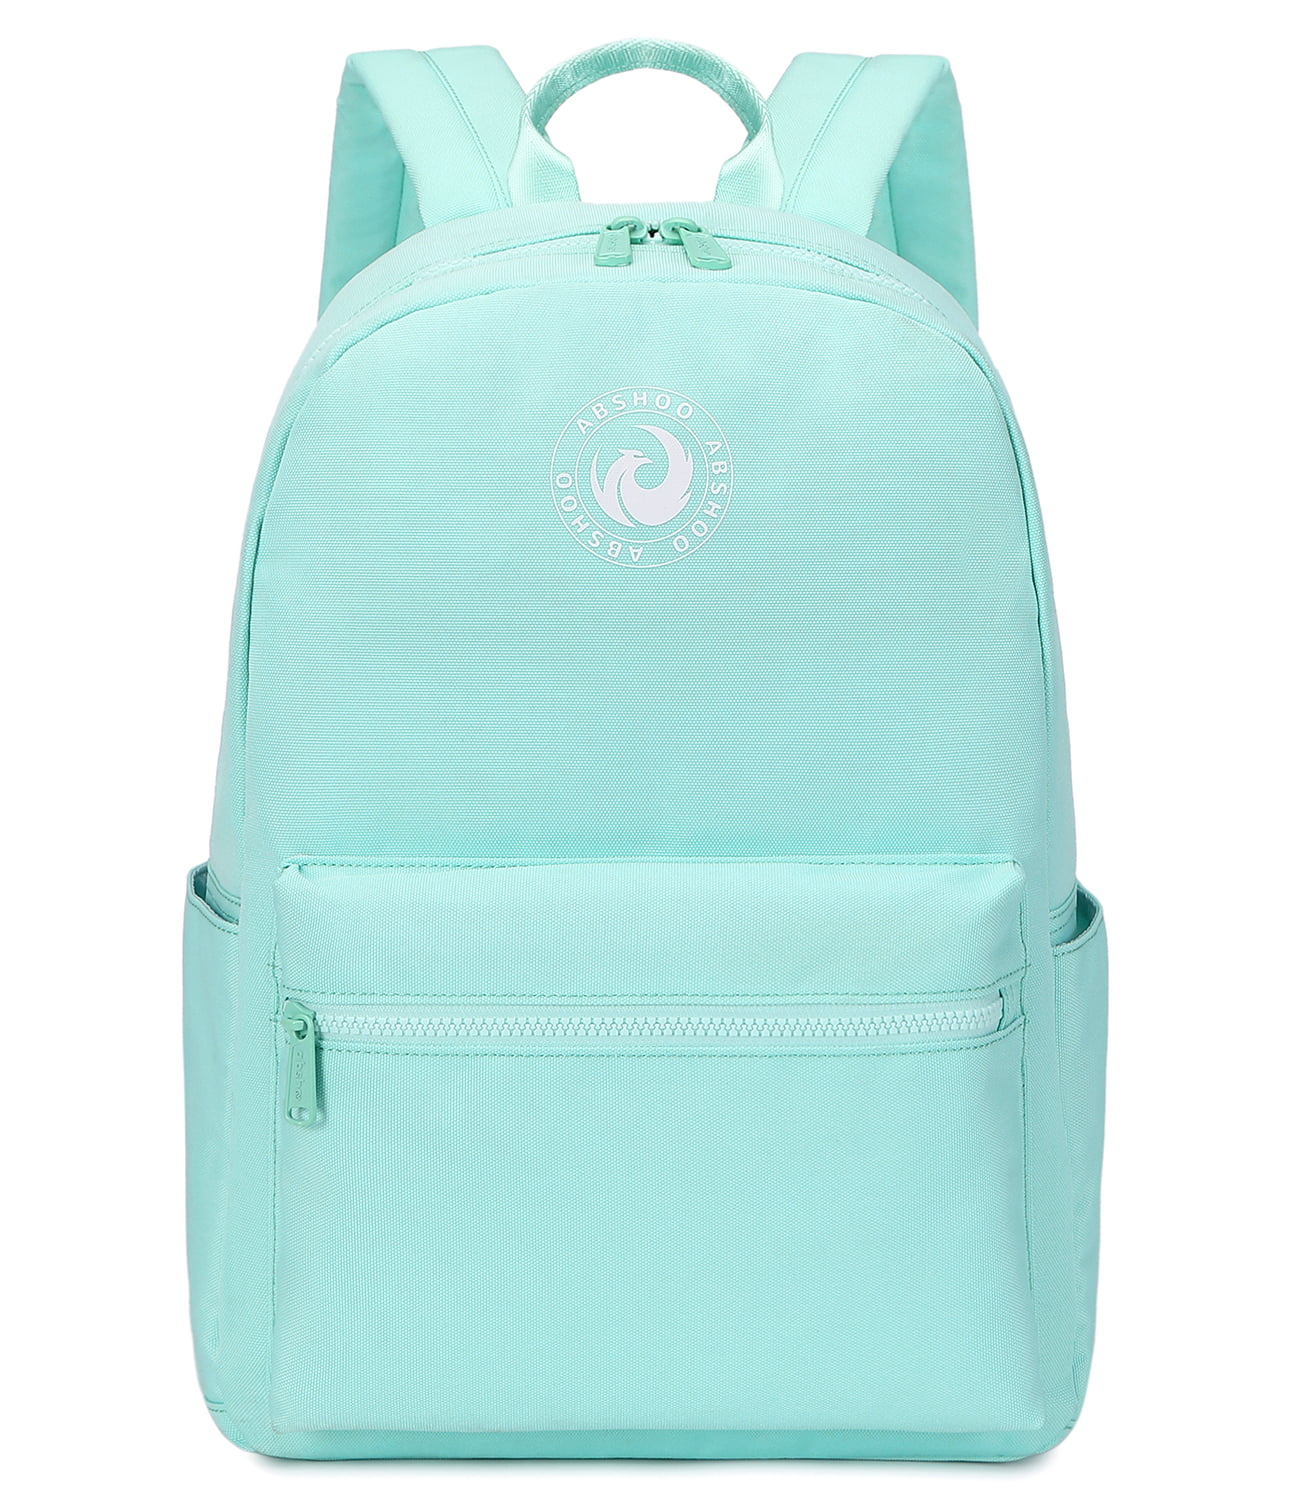 Abshoo Lightweight Casual Unisex Backpack for School Solid Color Boobags Teal 